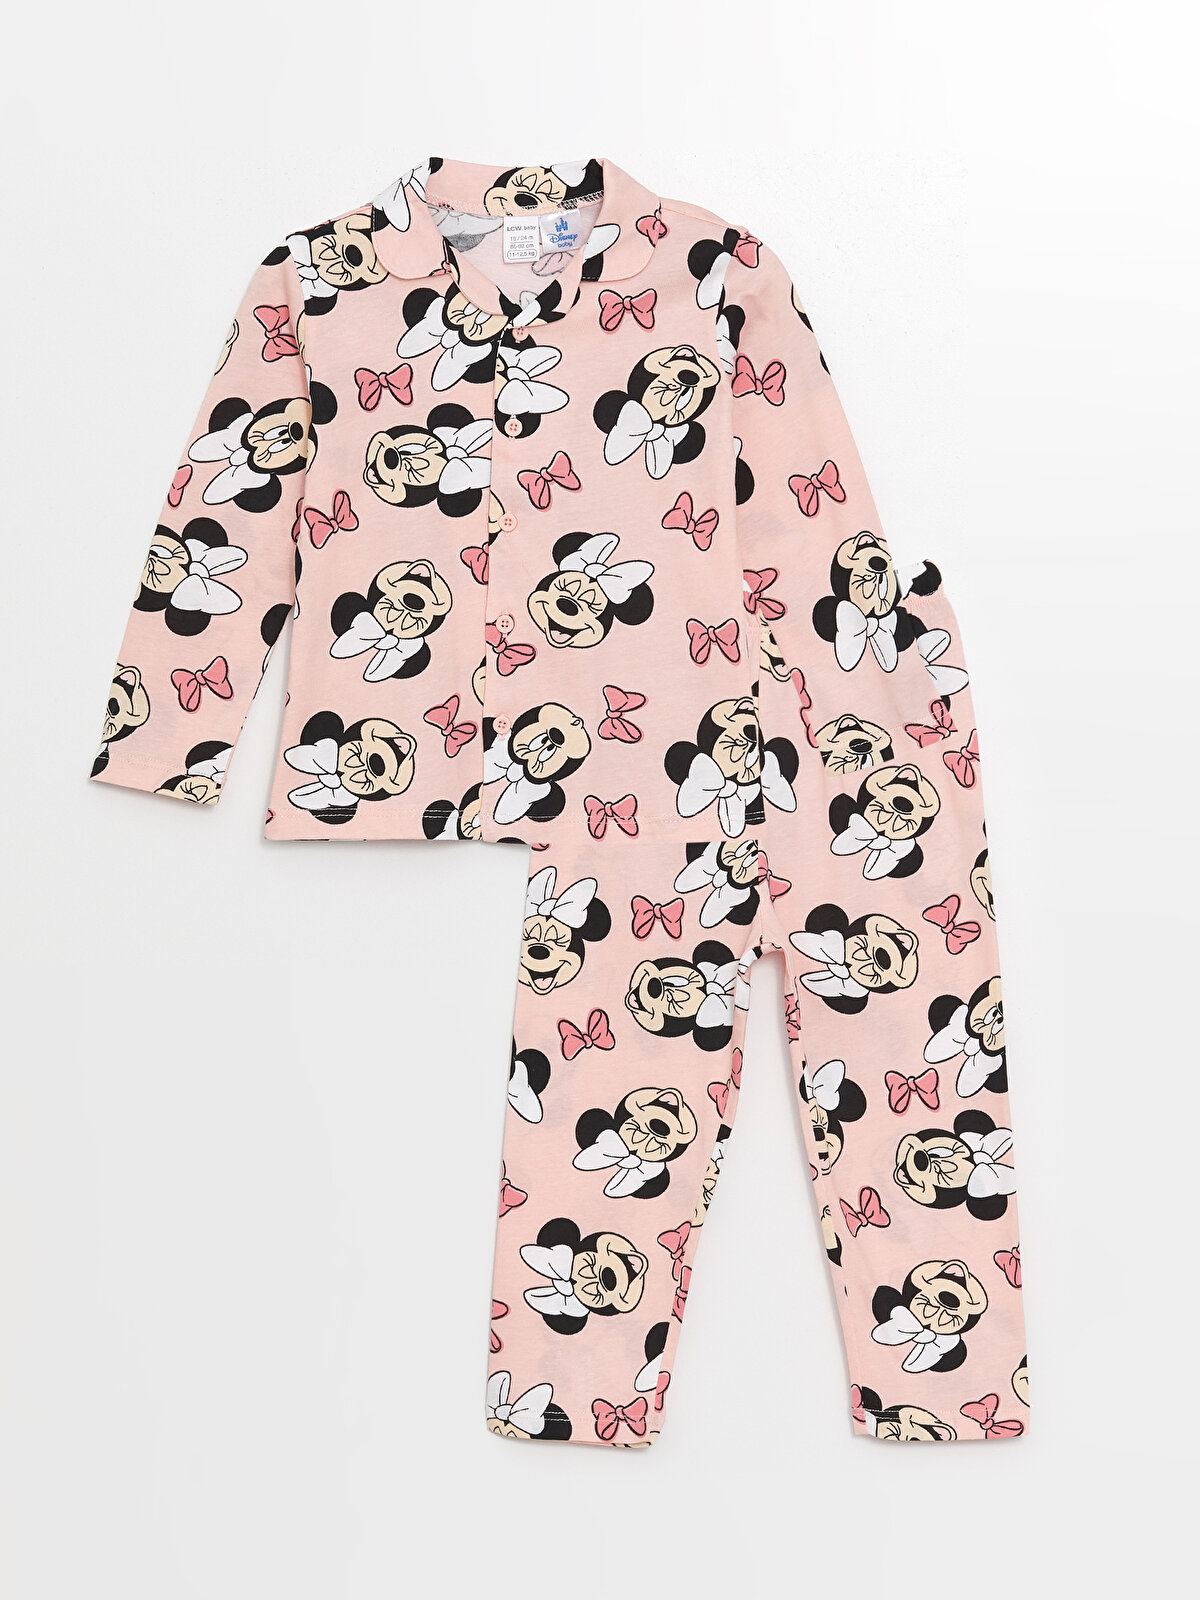 Polo Neck Long Sleeve Minnie Mouse Printed Baby Girl Pajama Set  -S4CY48Z1-LT4 - S4CY48Z1-LT4 - LC Waikiki